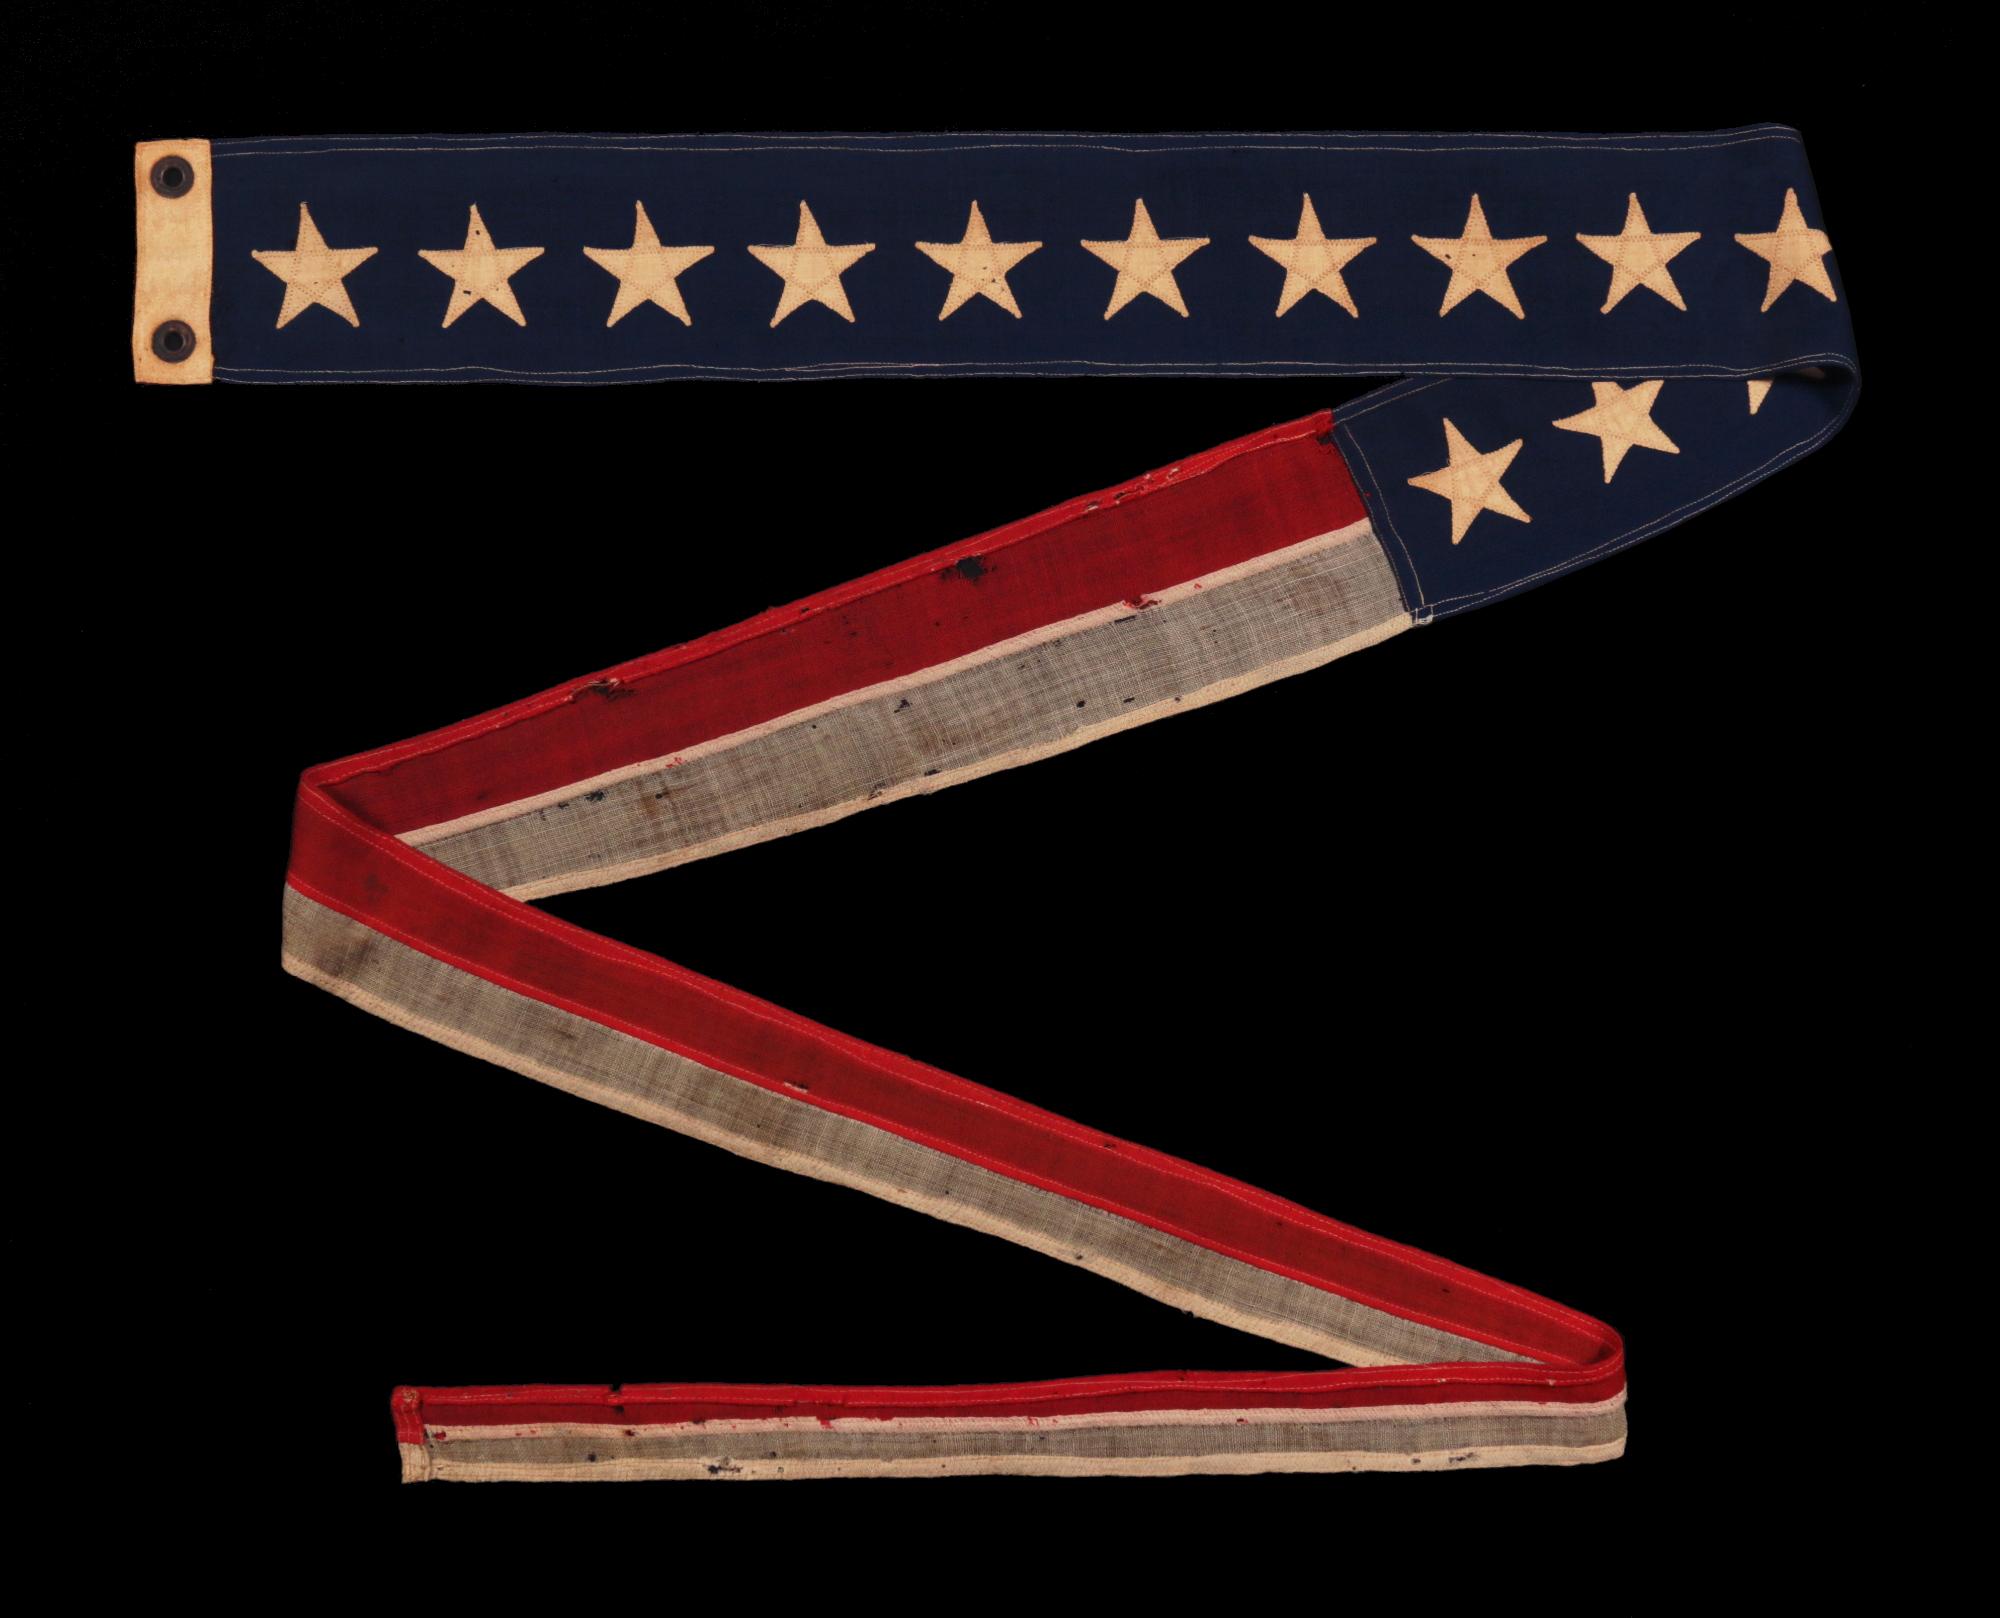 8-Foot commission pennant with 13 stars, a unique example in my experience, likely produced for display on a private vessel, made circa 1892-1910.

Commission pennants are the distinguishing mark of a commissioned U.S. Navy ship. Flown at the